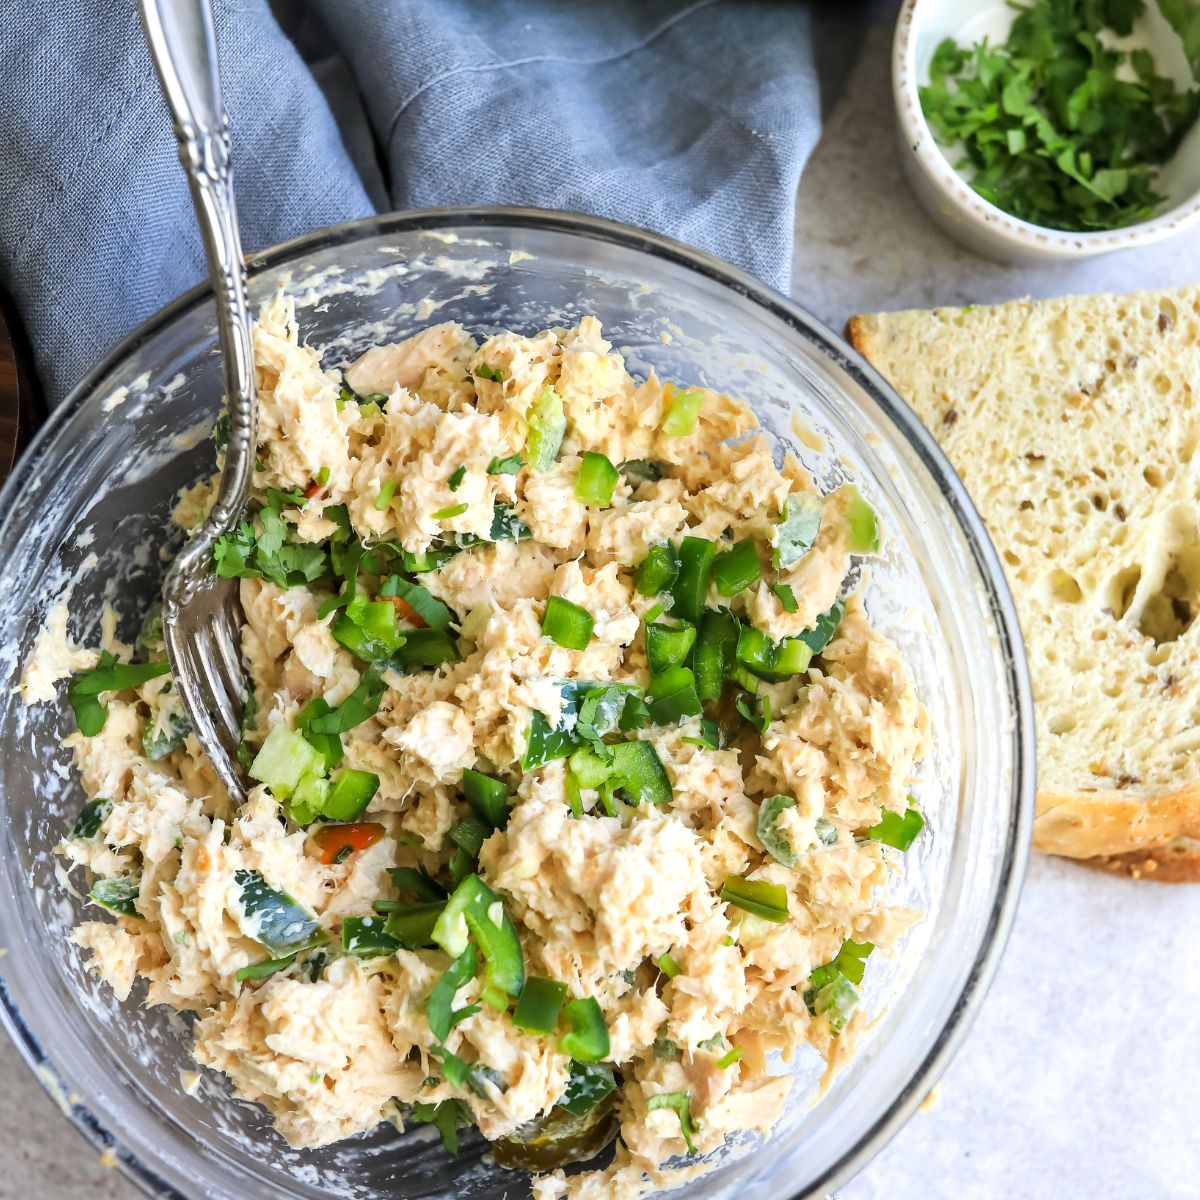 Tuna in a clear bowl with jalapeño and bread.